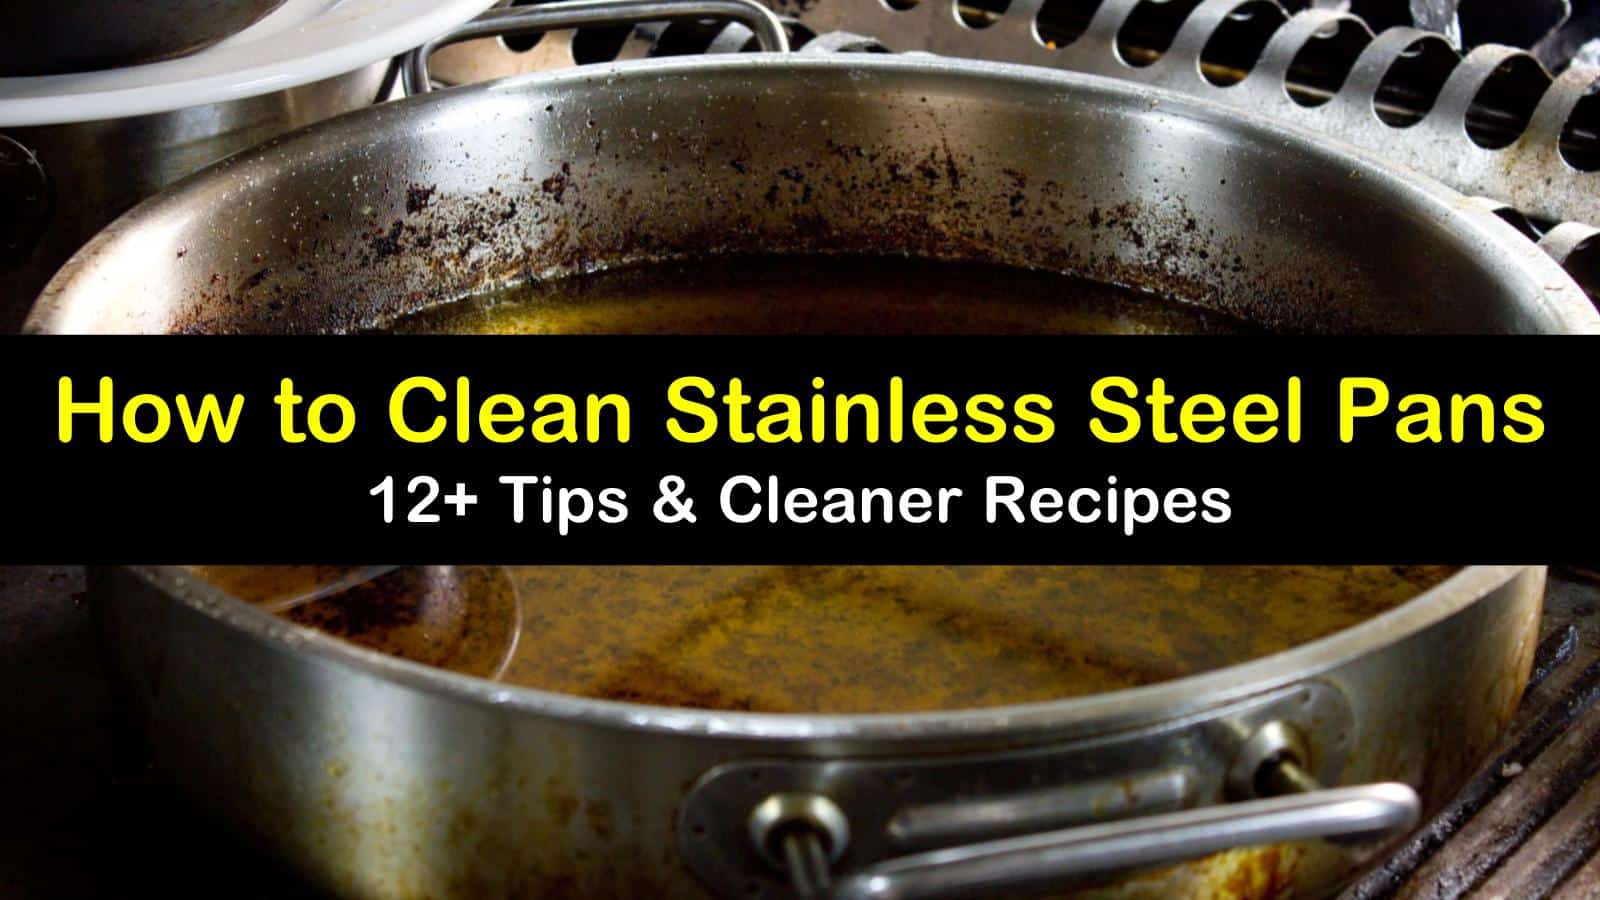 how to clean stainless steel pans titleimg1